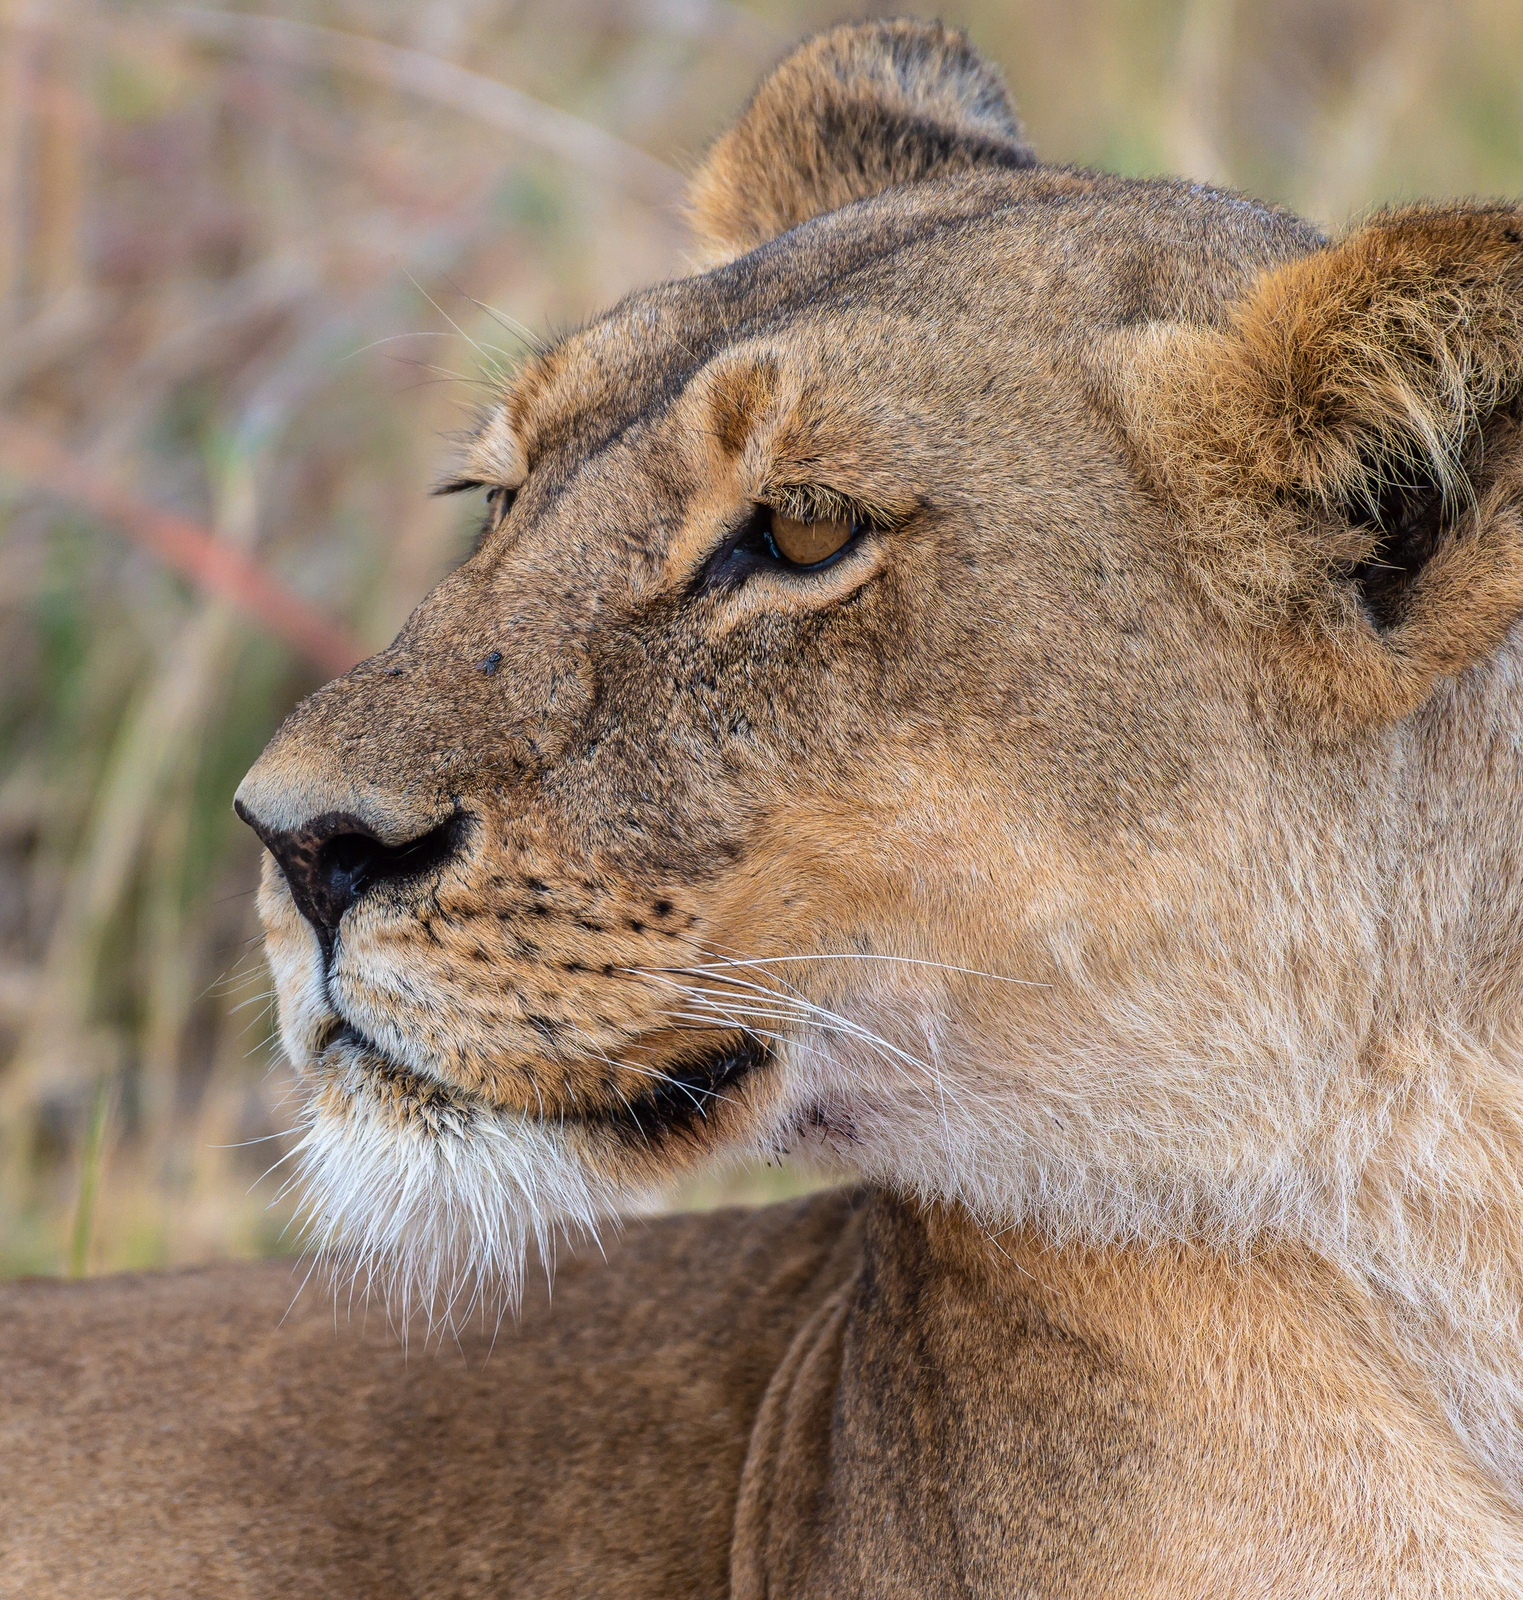 Image of Hwange National Park by Sue Wolfe